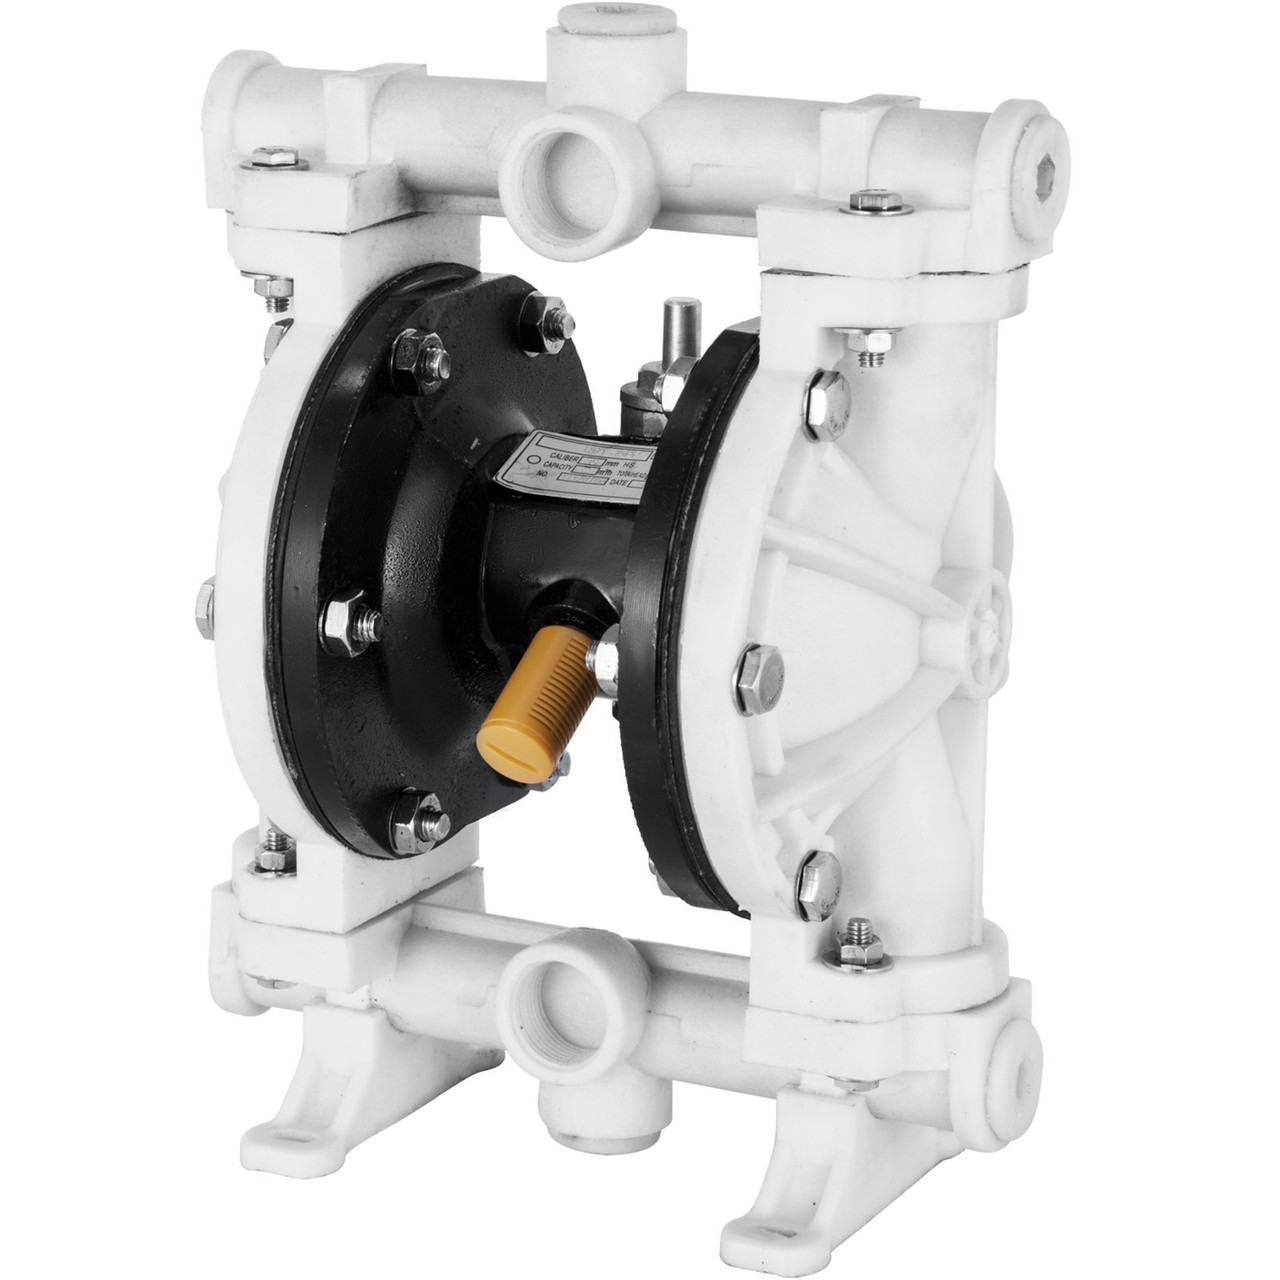 Air-Operated Double Diaphragm Pump, 1/2 in Inlet & Outlet, Polypropylene Body, 13.2 GPM & Max 120PSI, PTFE Diaphragm Pneumatic Transfer Pump for Petroleum, Diesel, Oil & Low Viscosity Fluids